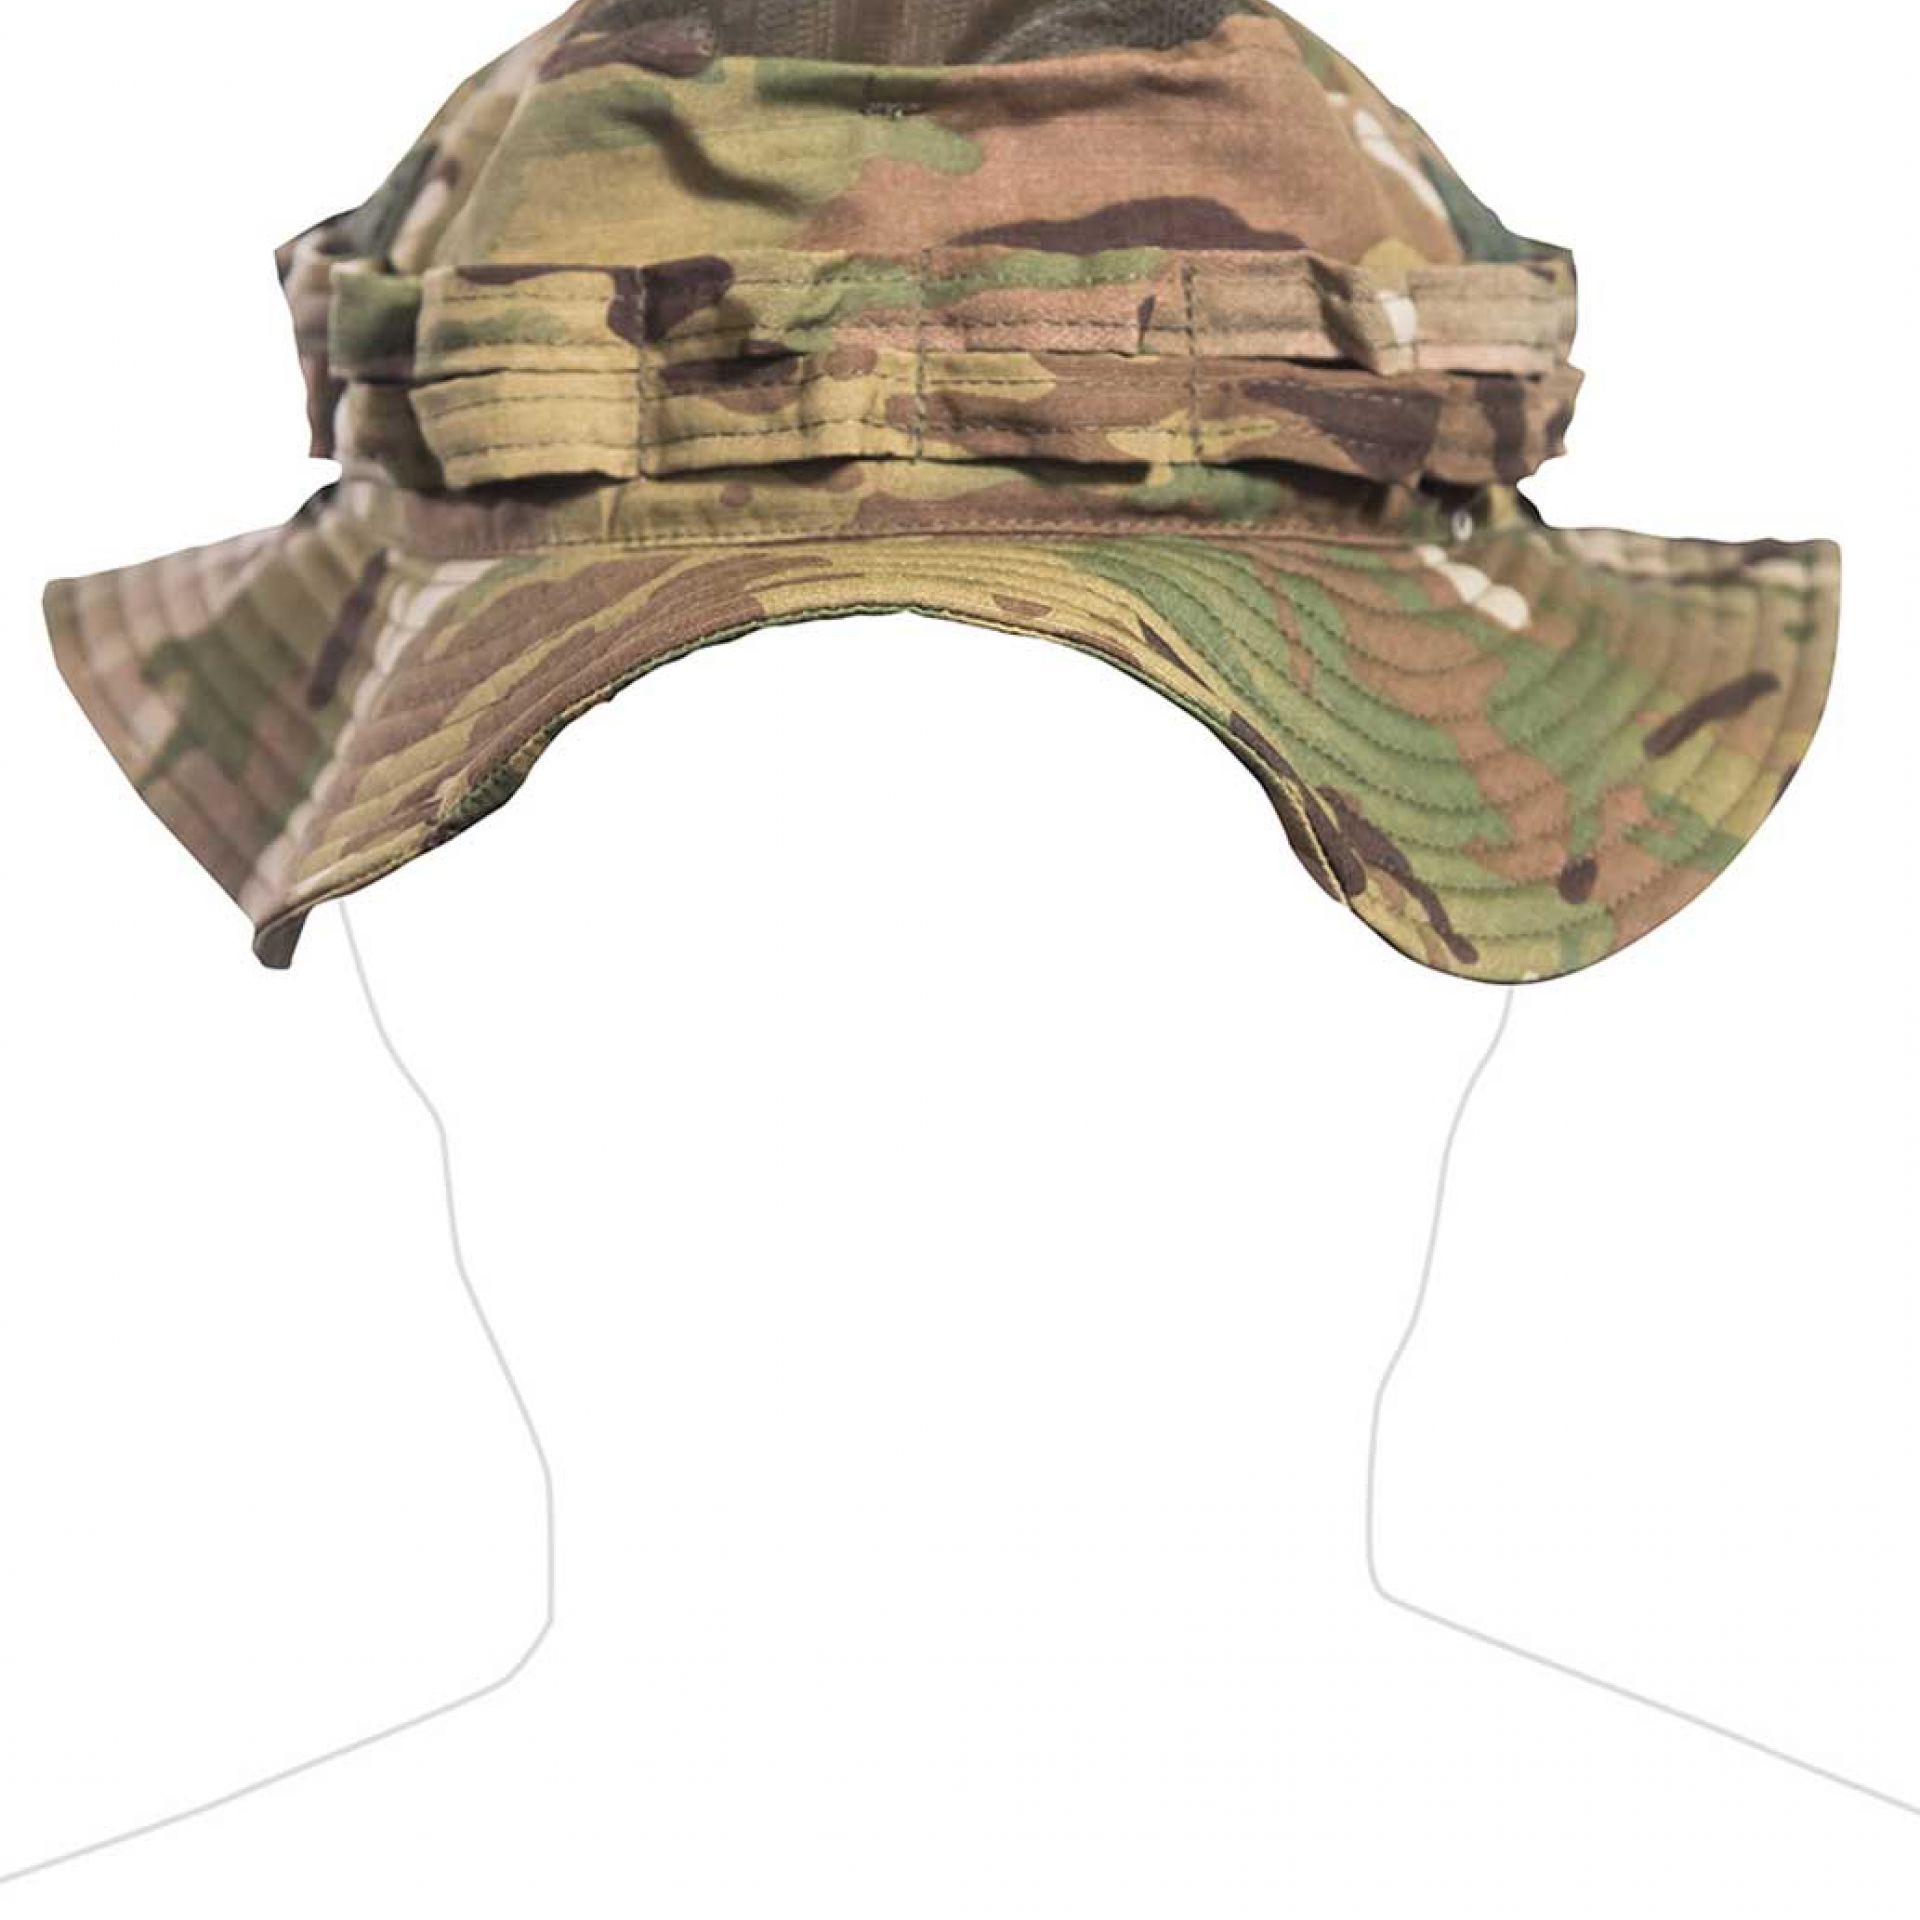 Boonie hat | Sun protection with mesh ventilation | UF PRO